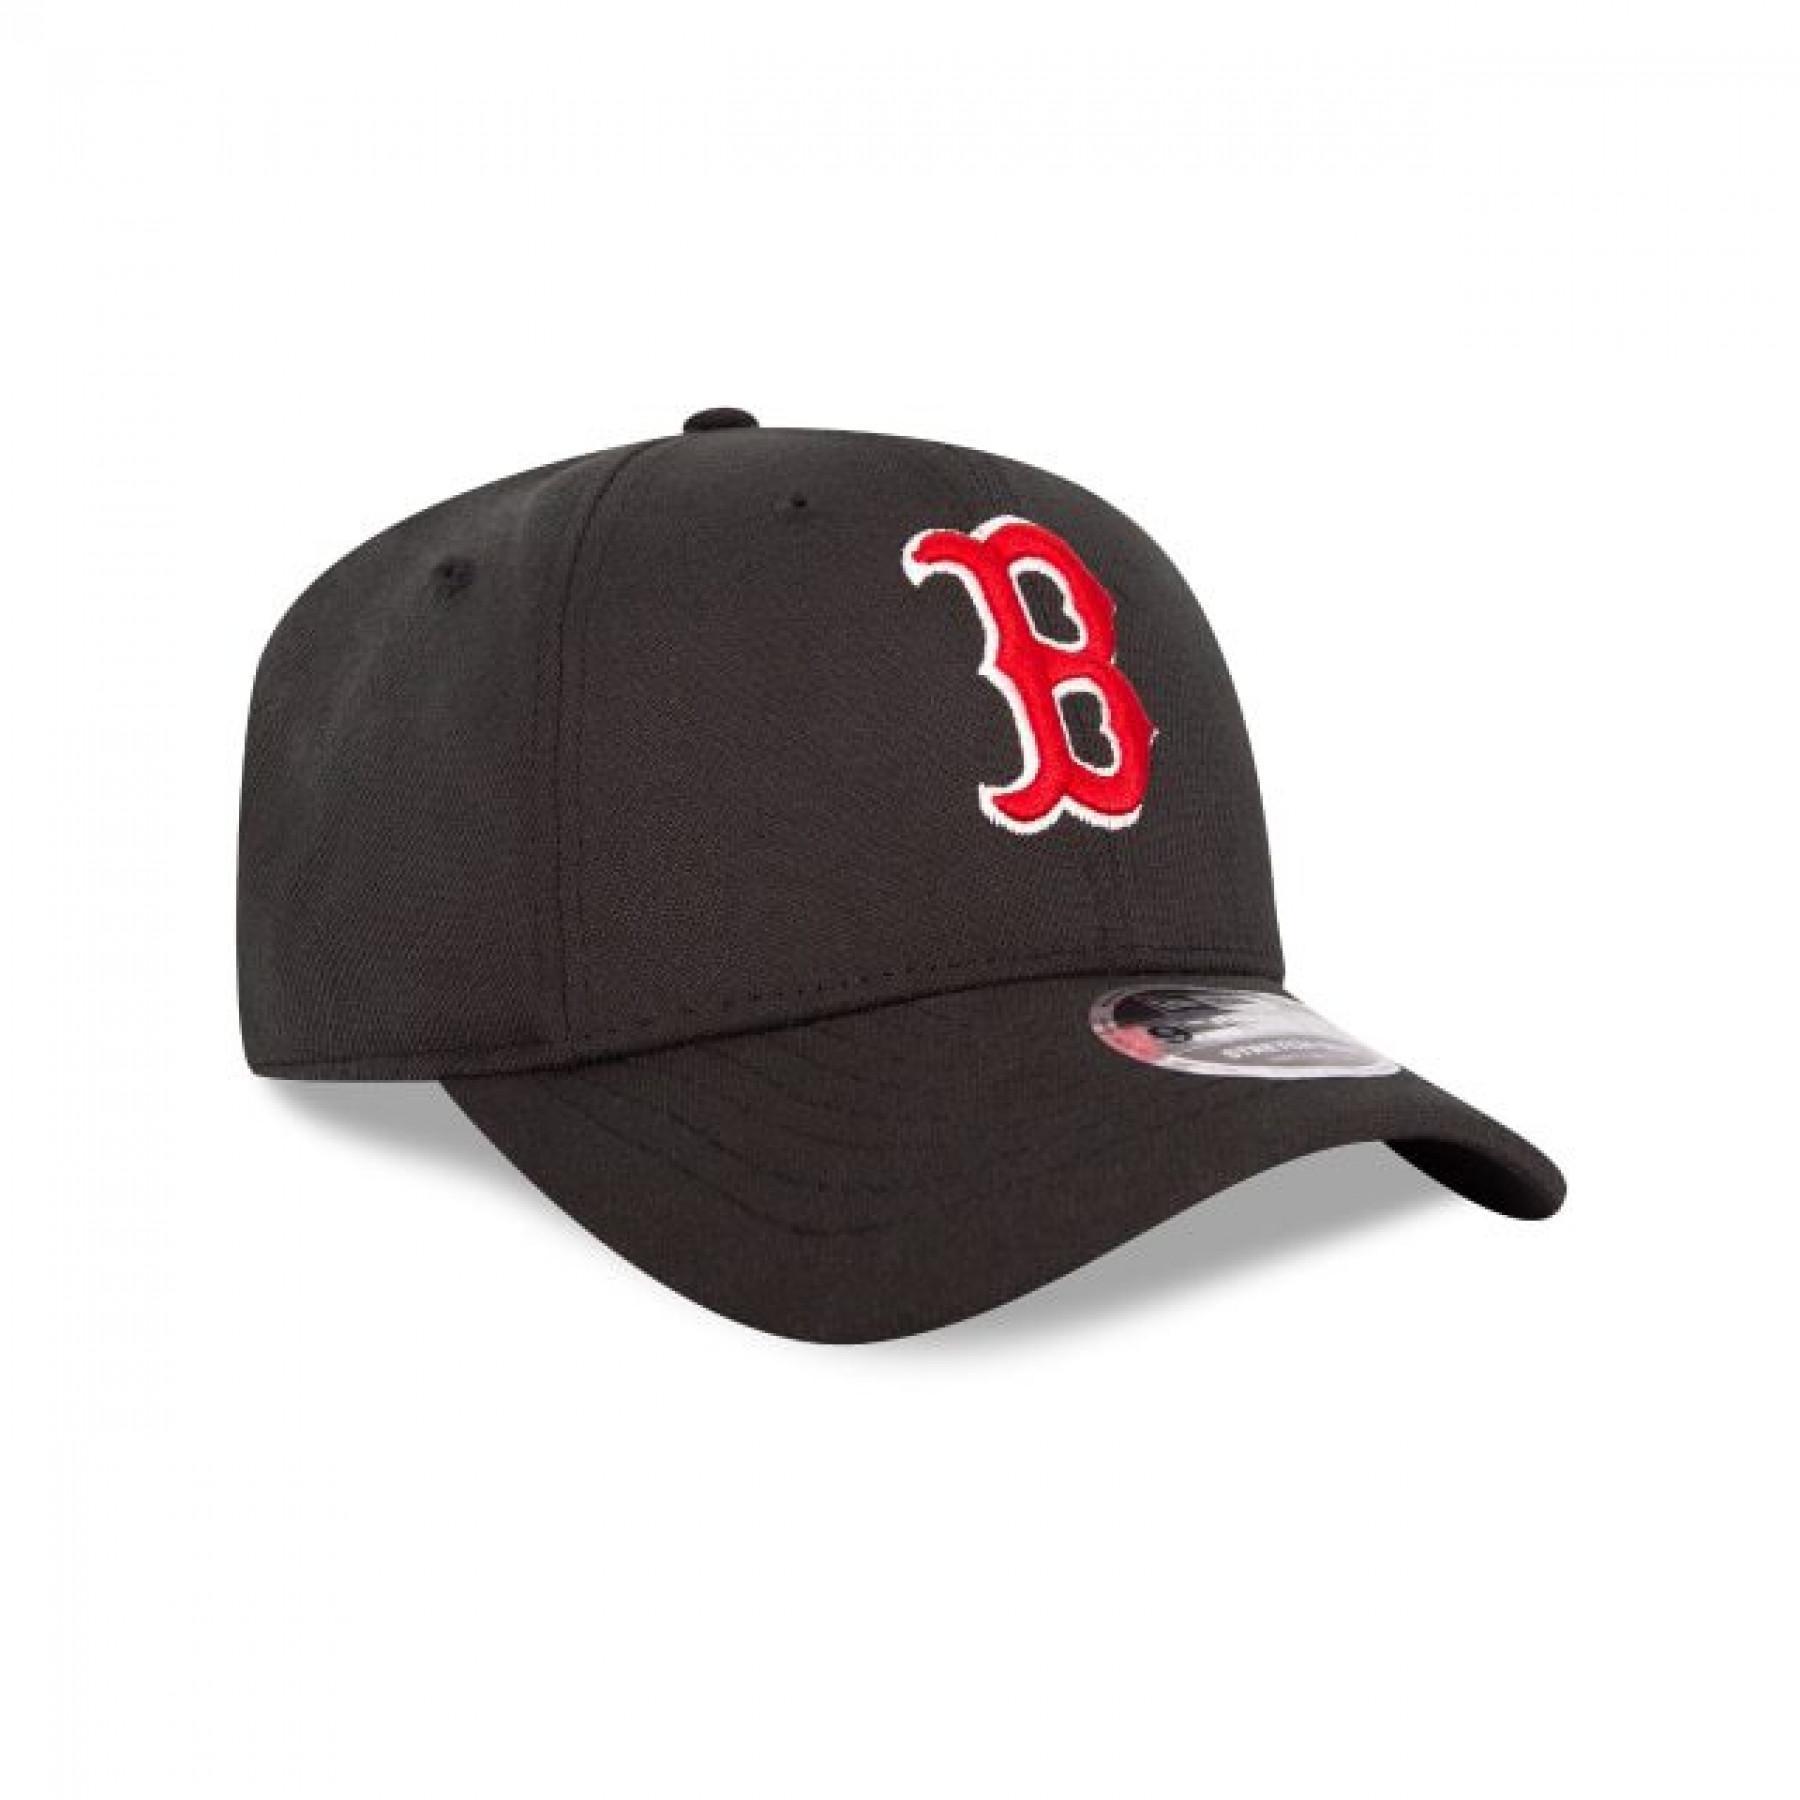 Casquette New Era Stretch Snap 9fifty Boston Red Sox